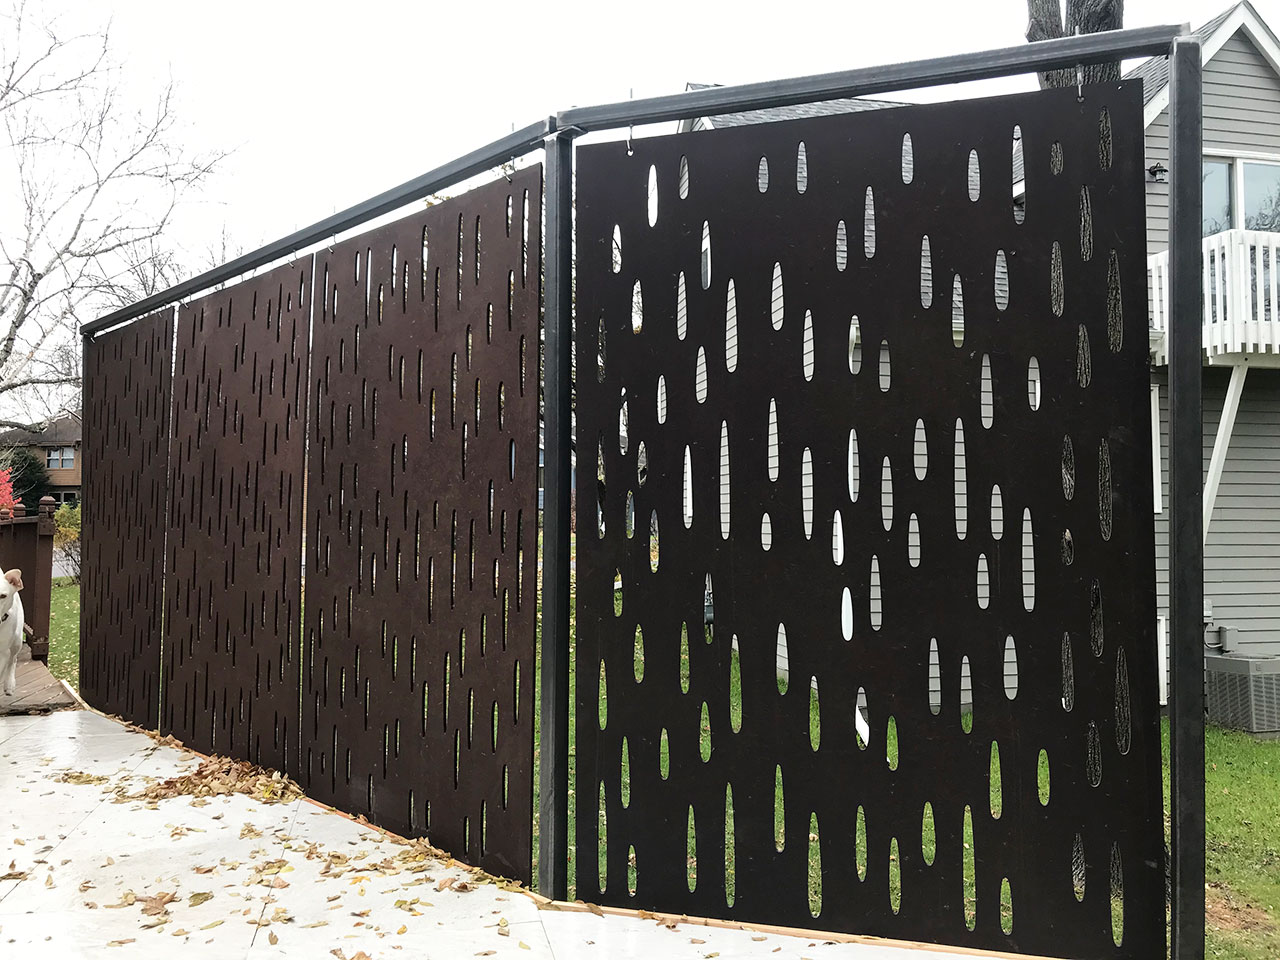 OUTDECO-Monsoon-Panels-on-a-raised-patio-to-screen-from-neighbors